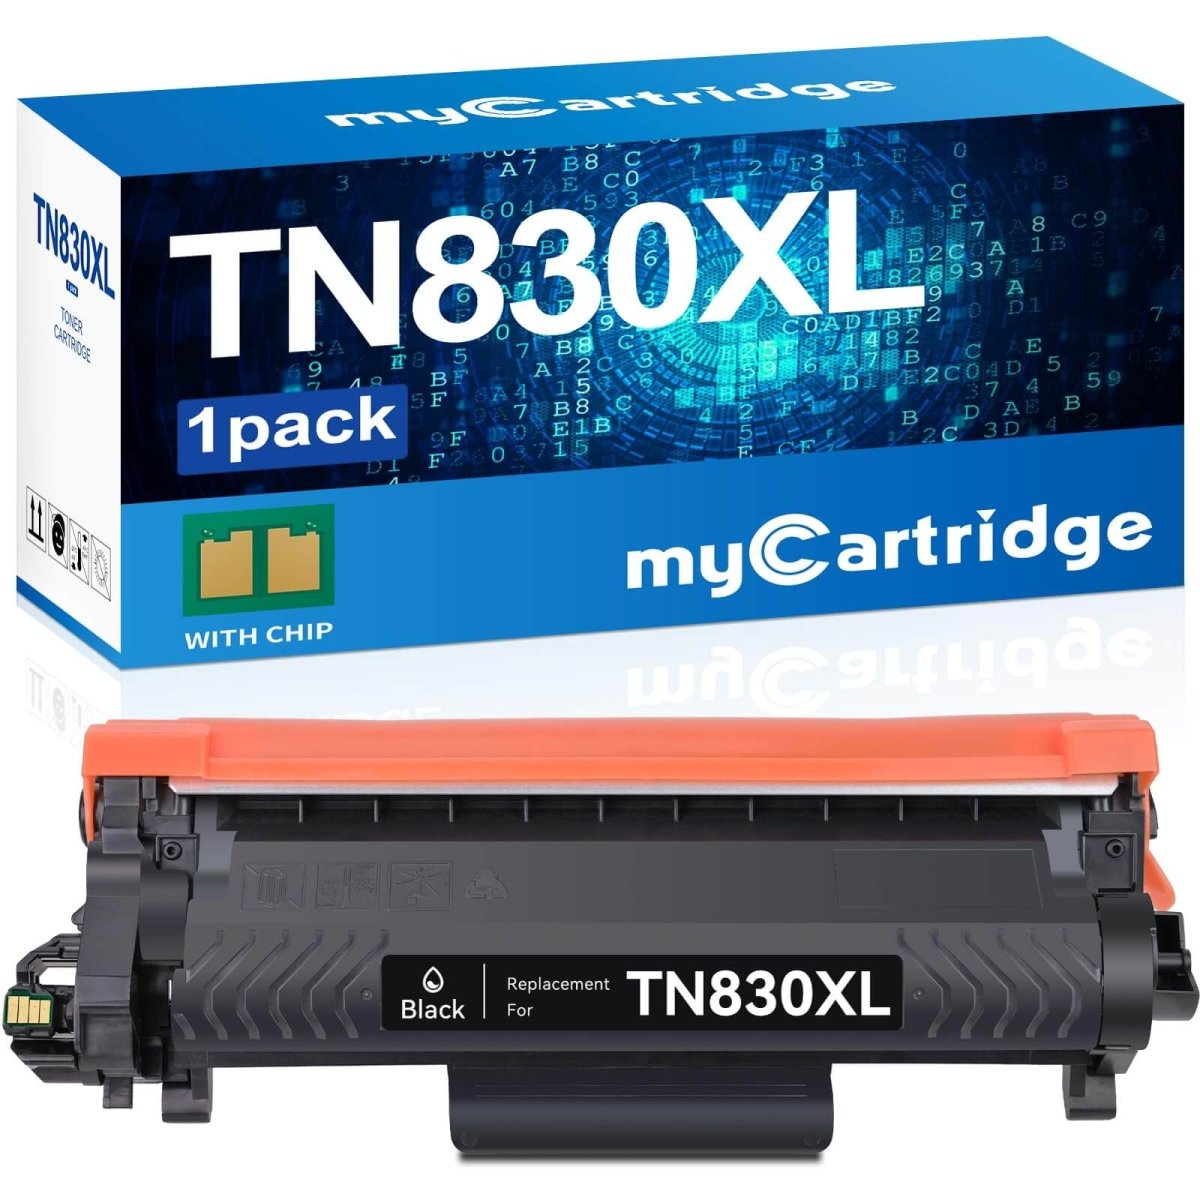 Compatible Brother TN830XL Toner Cartridge High Yield (Black, 2 Pack) - Linford Office:Printer Ink & Toner Cartridge